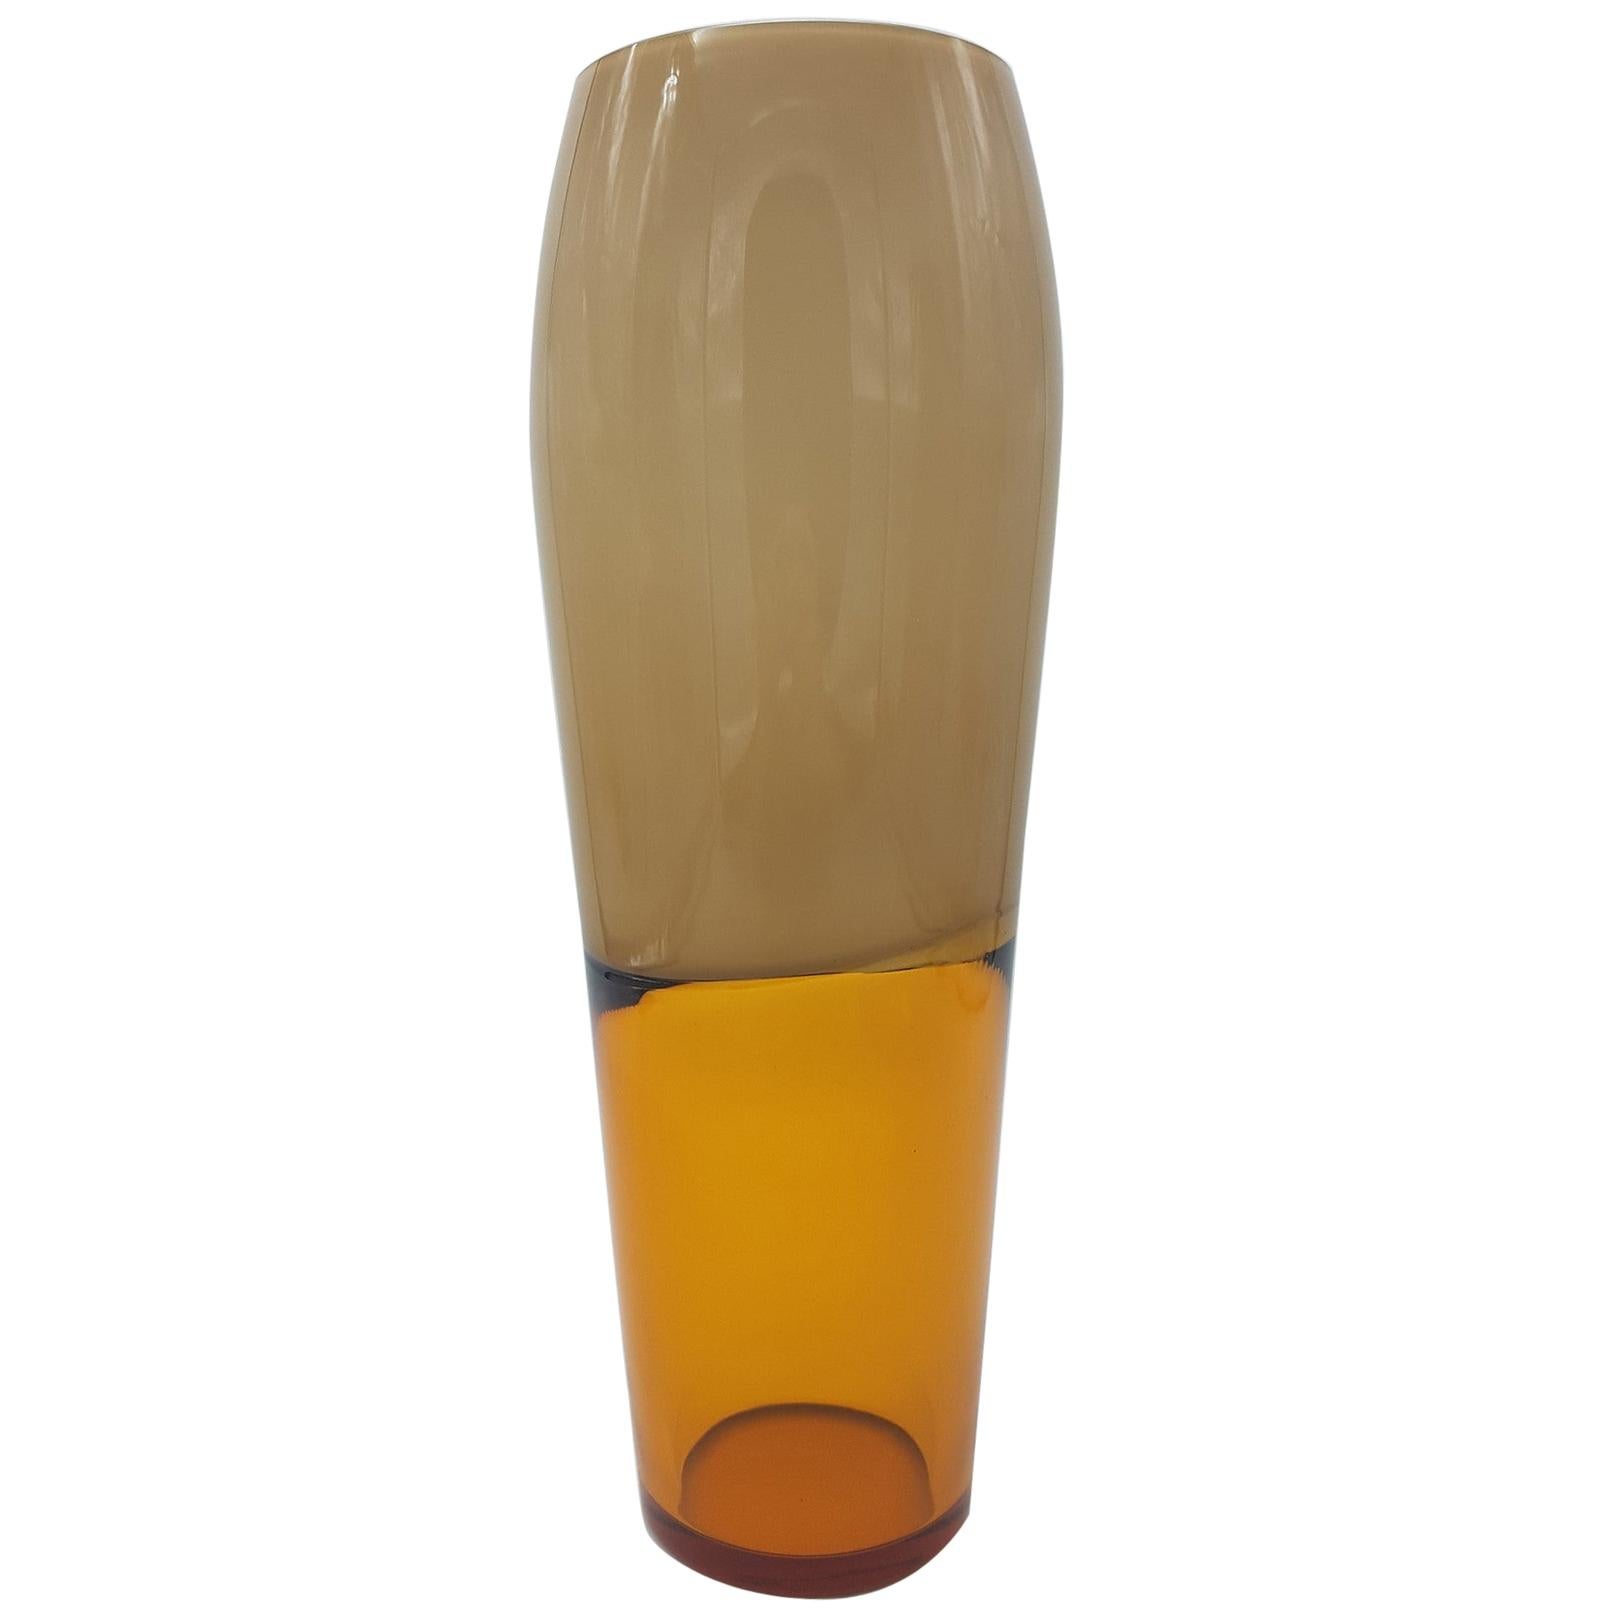 Modern Murano Glass Vase, Amber & Beige/Cream/Fawn Color 'Incalmo' by Cenedese For Sale